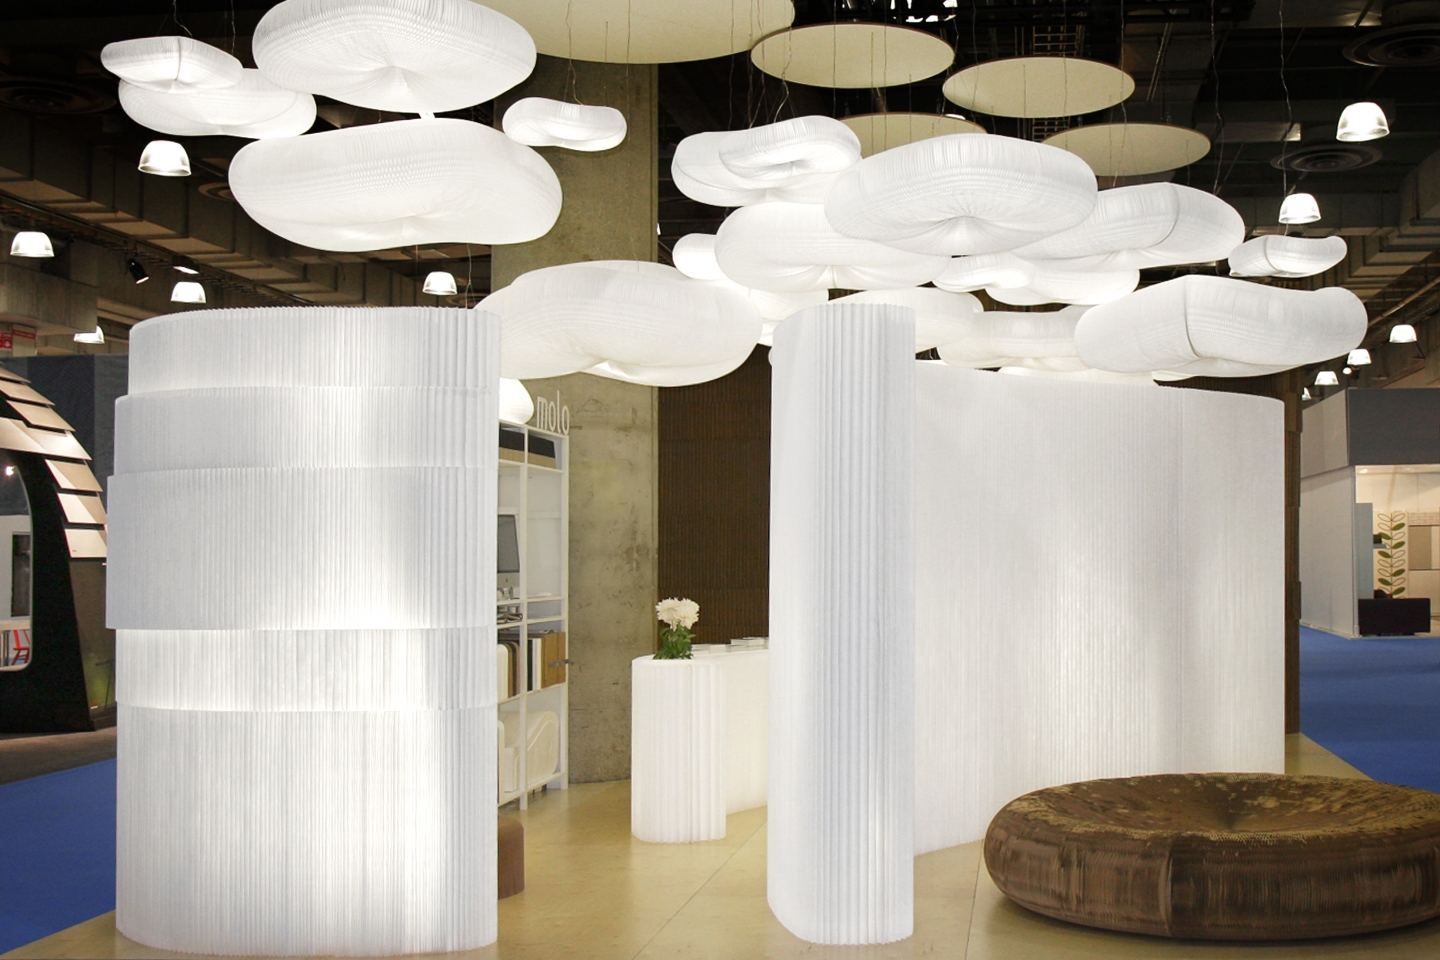 cloud pendant lighting, modular paper and textile partition walls and paper seating and furniture.